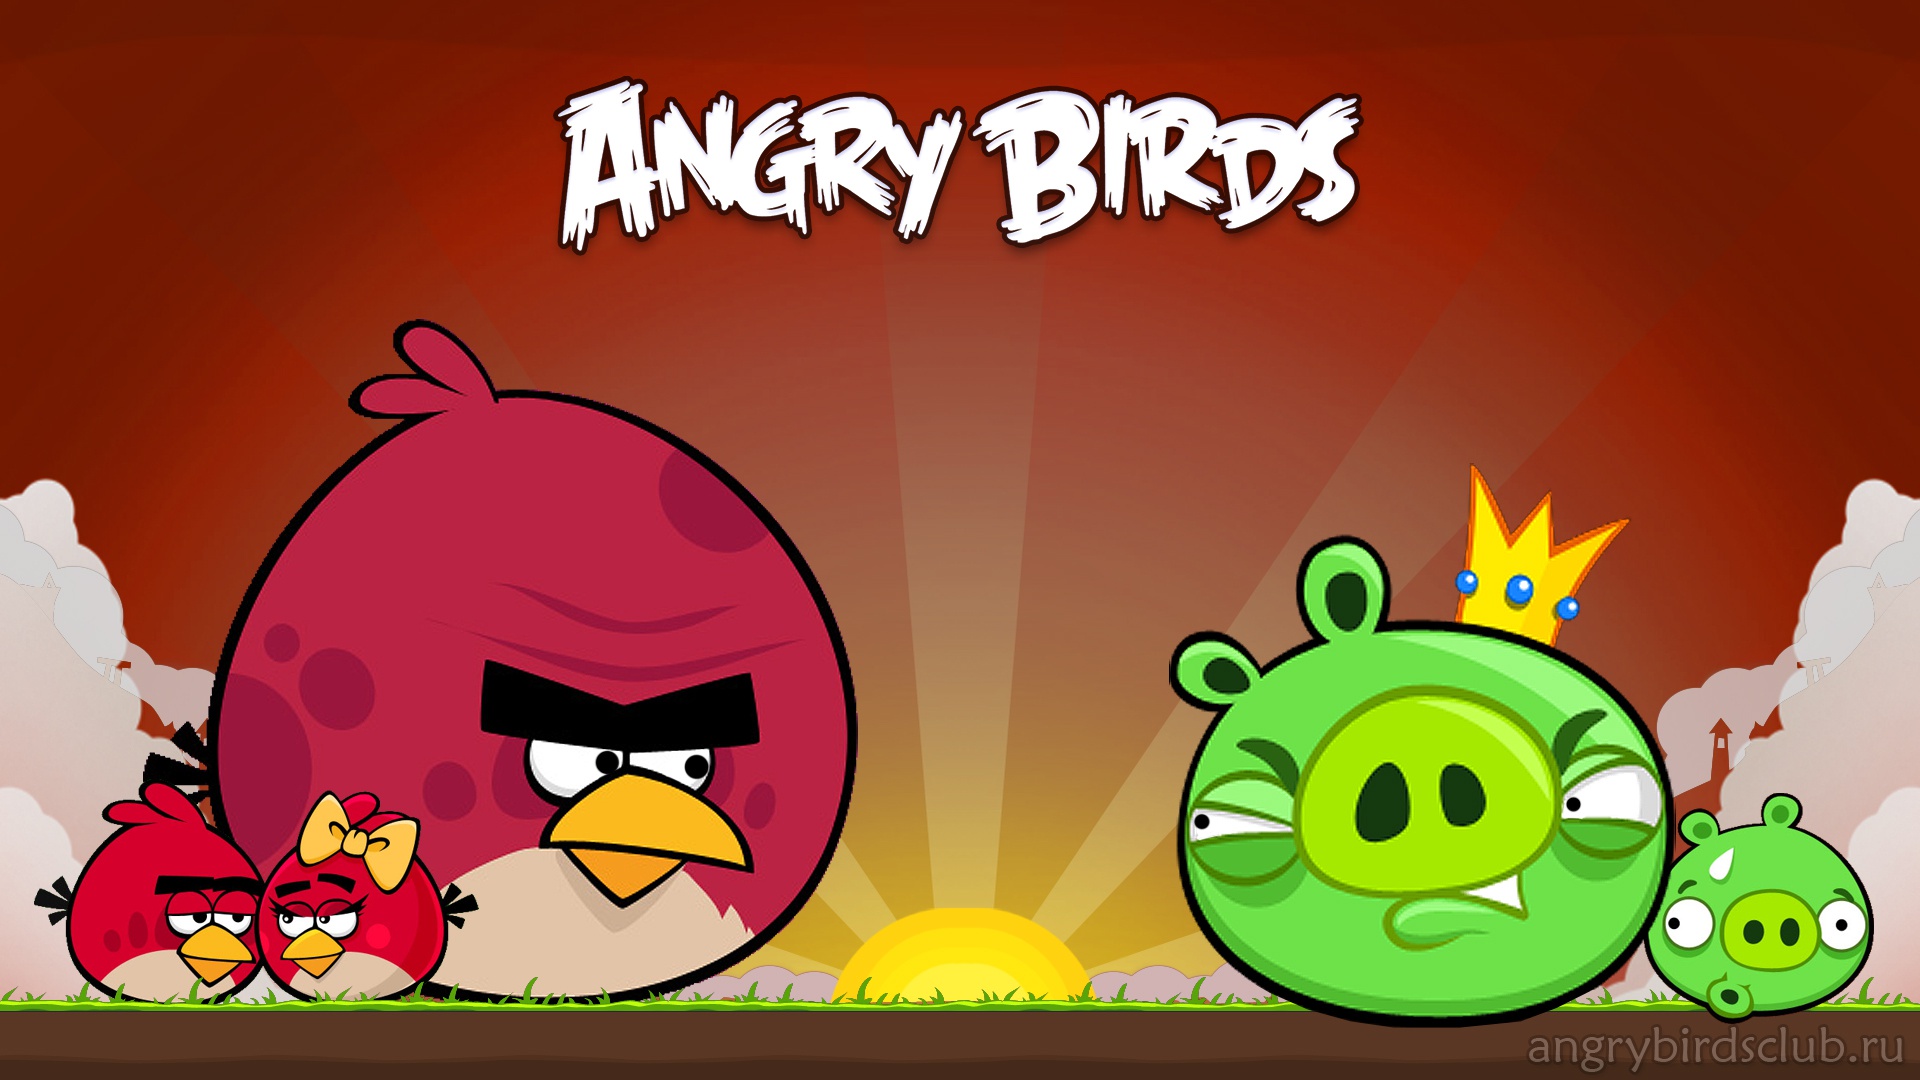 Angry bird wallpaper pc wallpapers